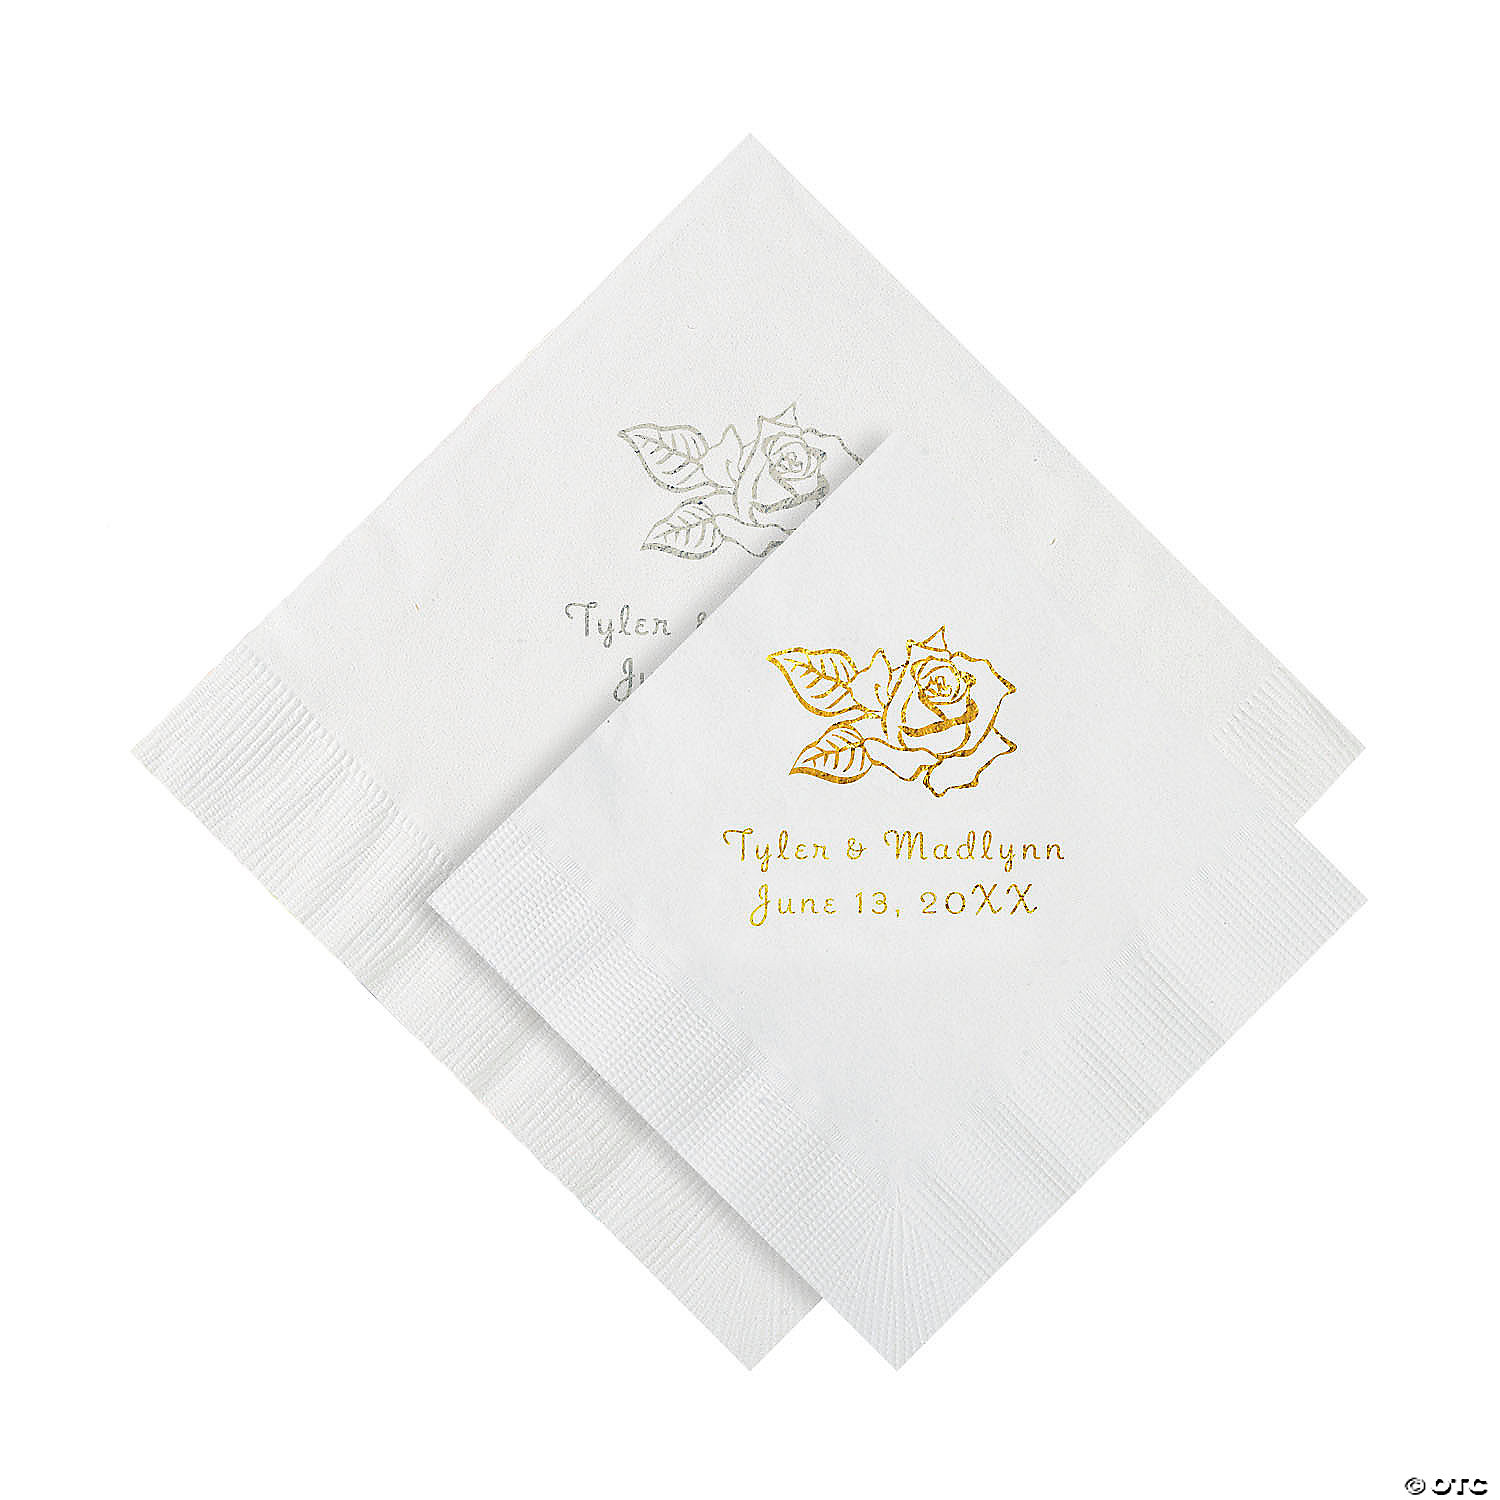 ROSE LOGO 50 Personalized printed LUNCHEON DINNER napkins 